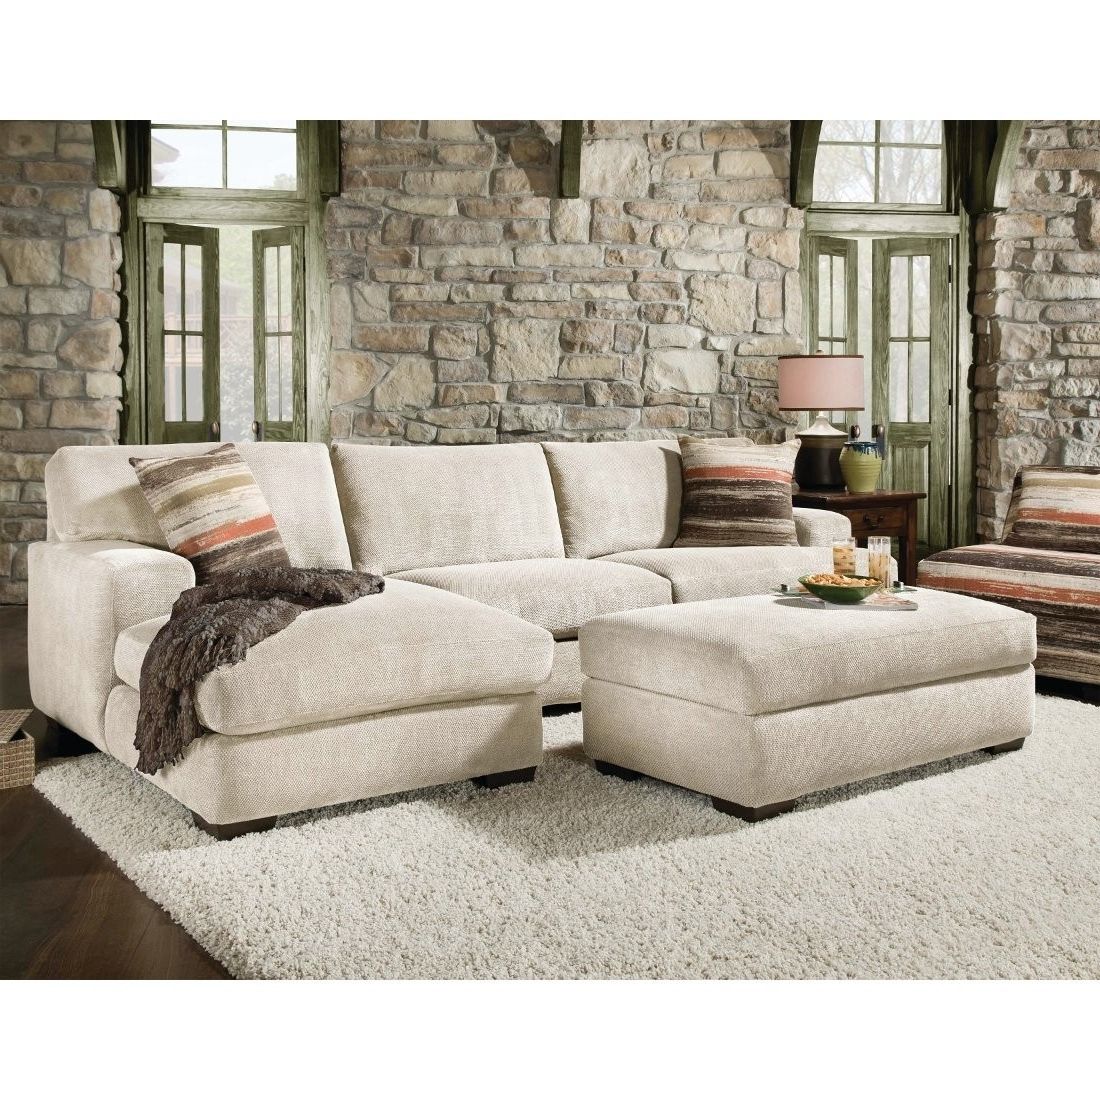 Well Known Sectional Sofas With Chaise Lounge Intended For Corinthian Mead Sectional Sofa Piece (View 15 of 15)